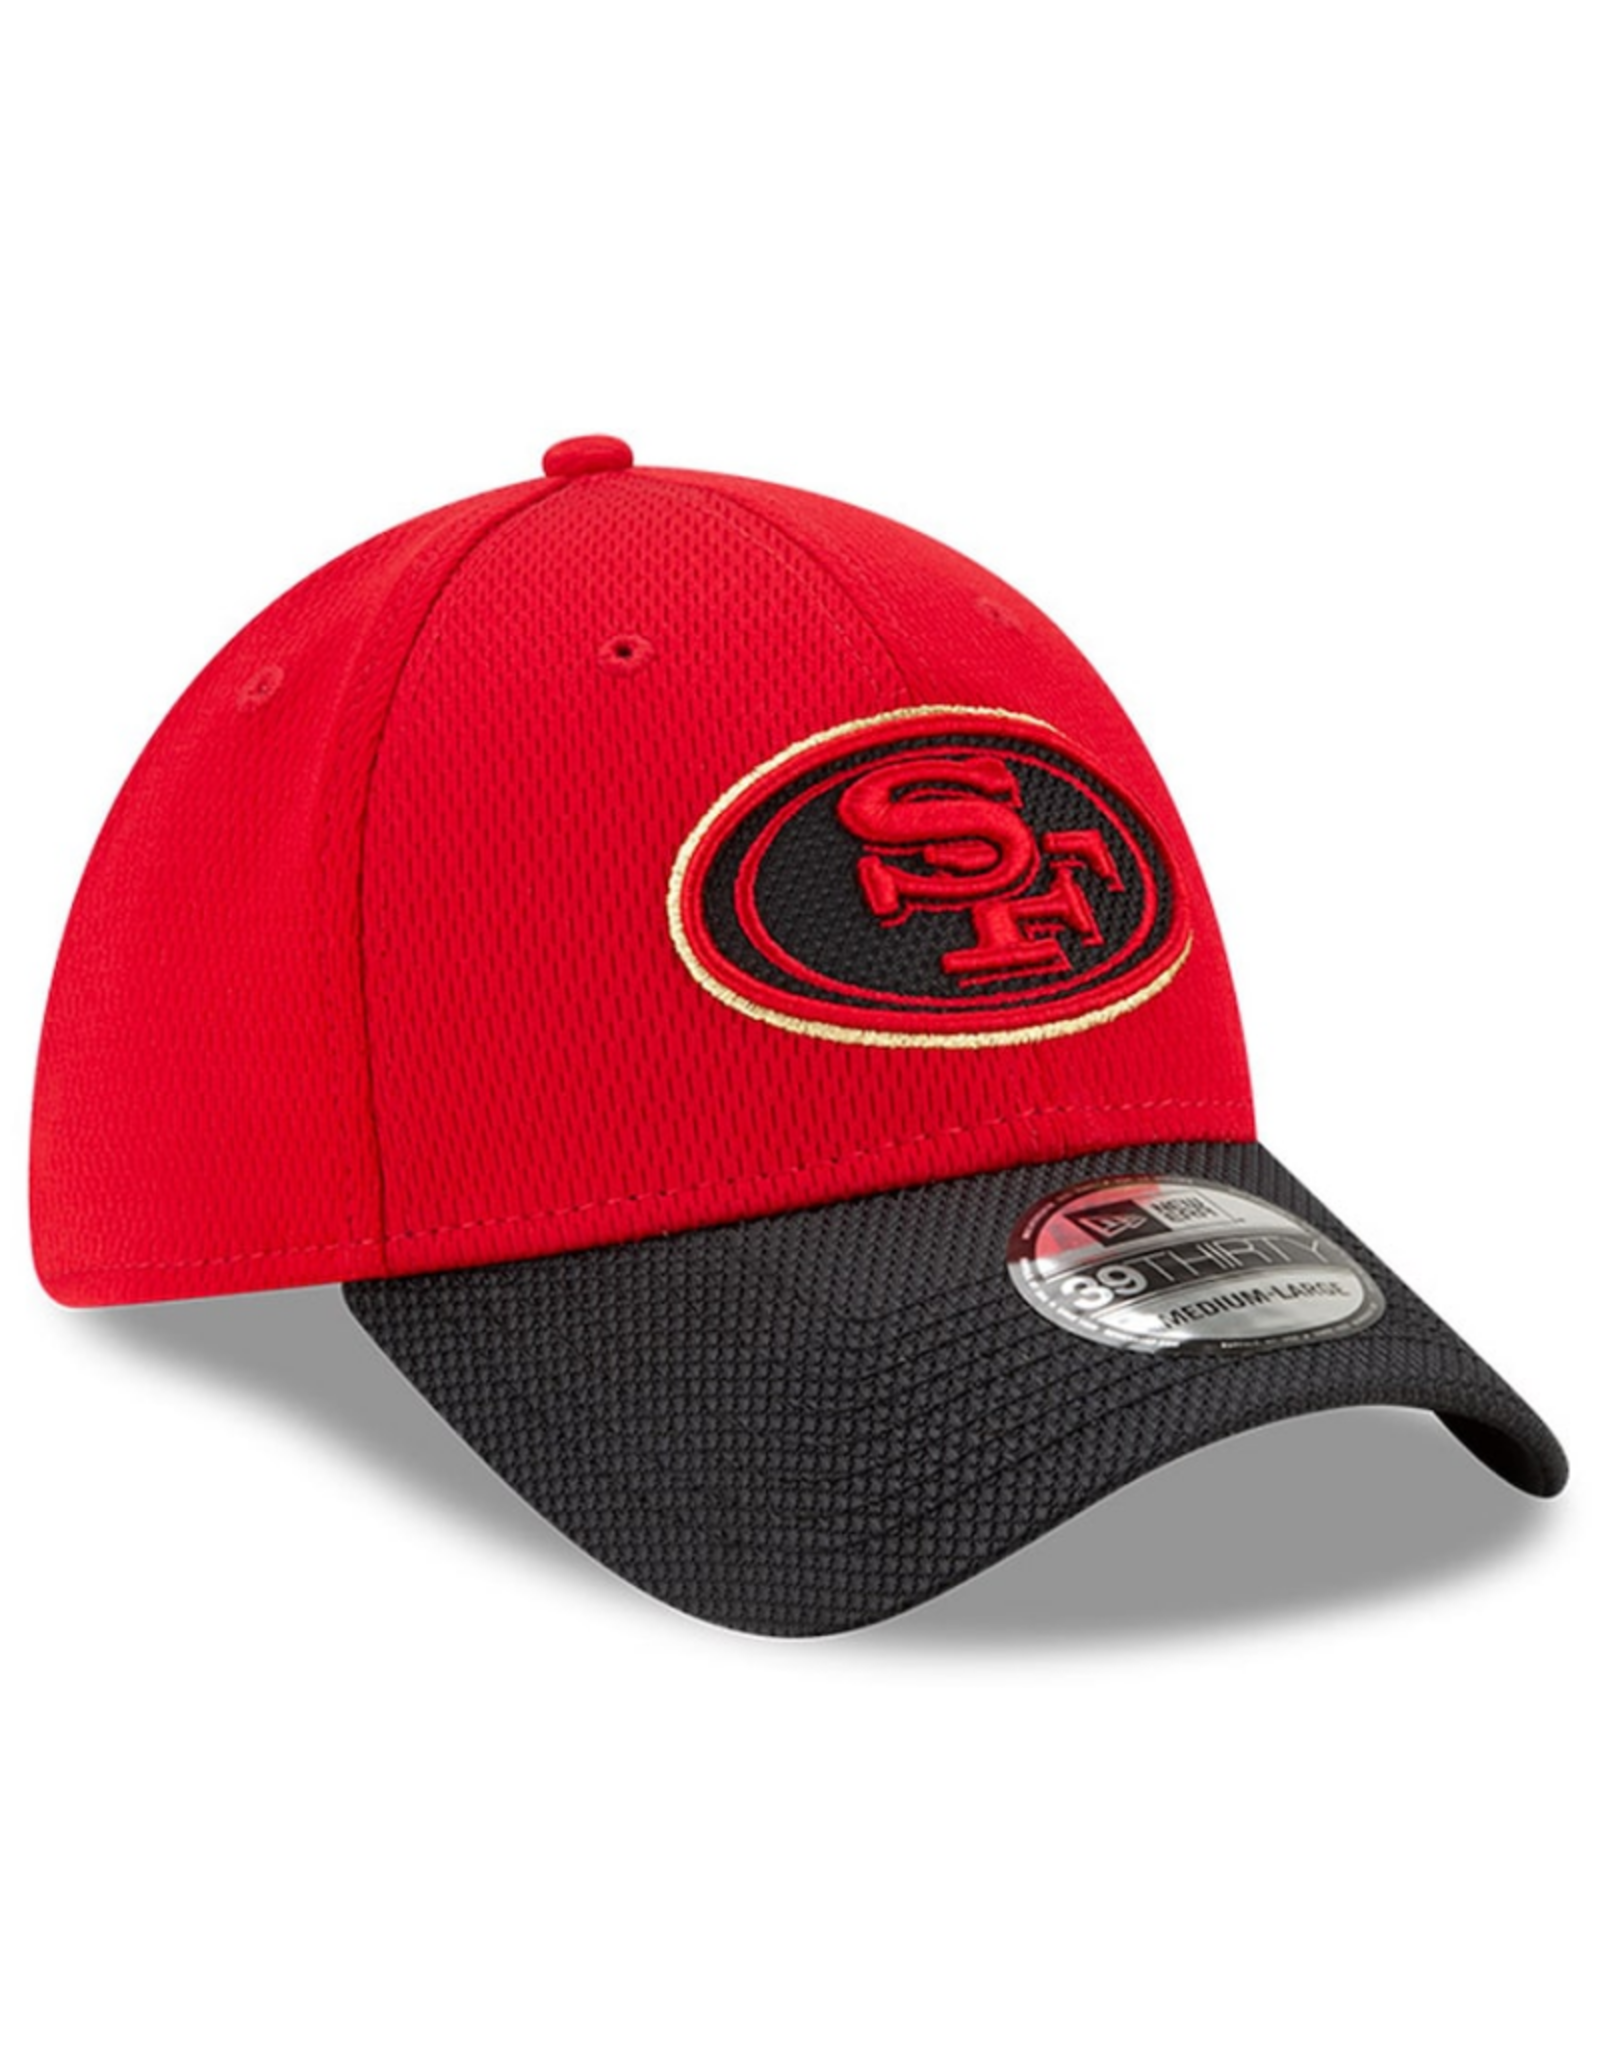 New Era '21 Sideline Road 39THIRTY San Francisco 49ers Red